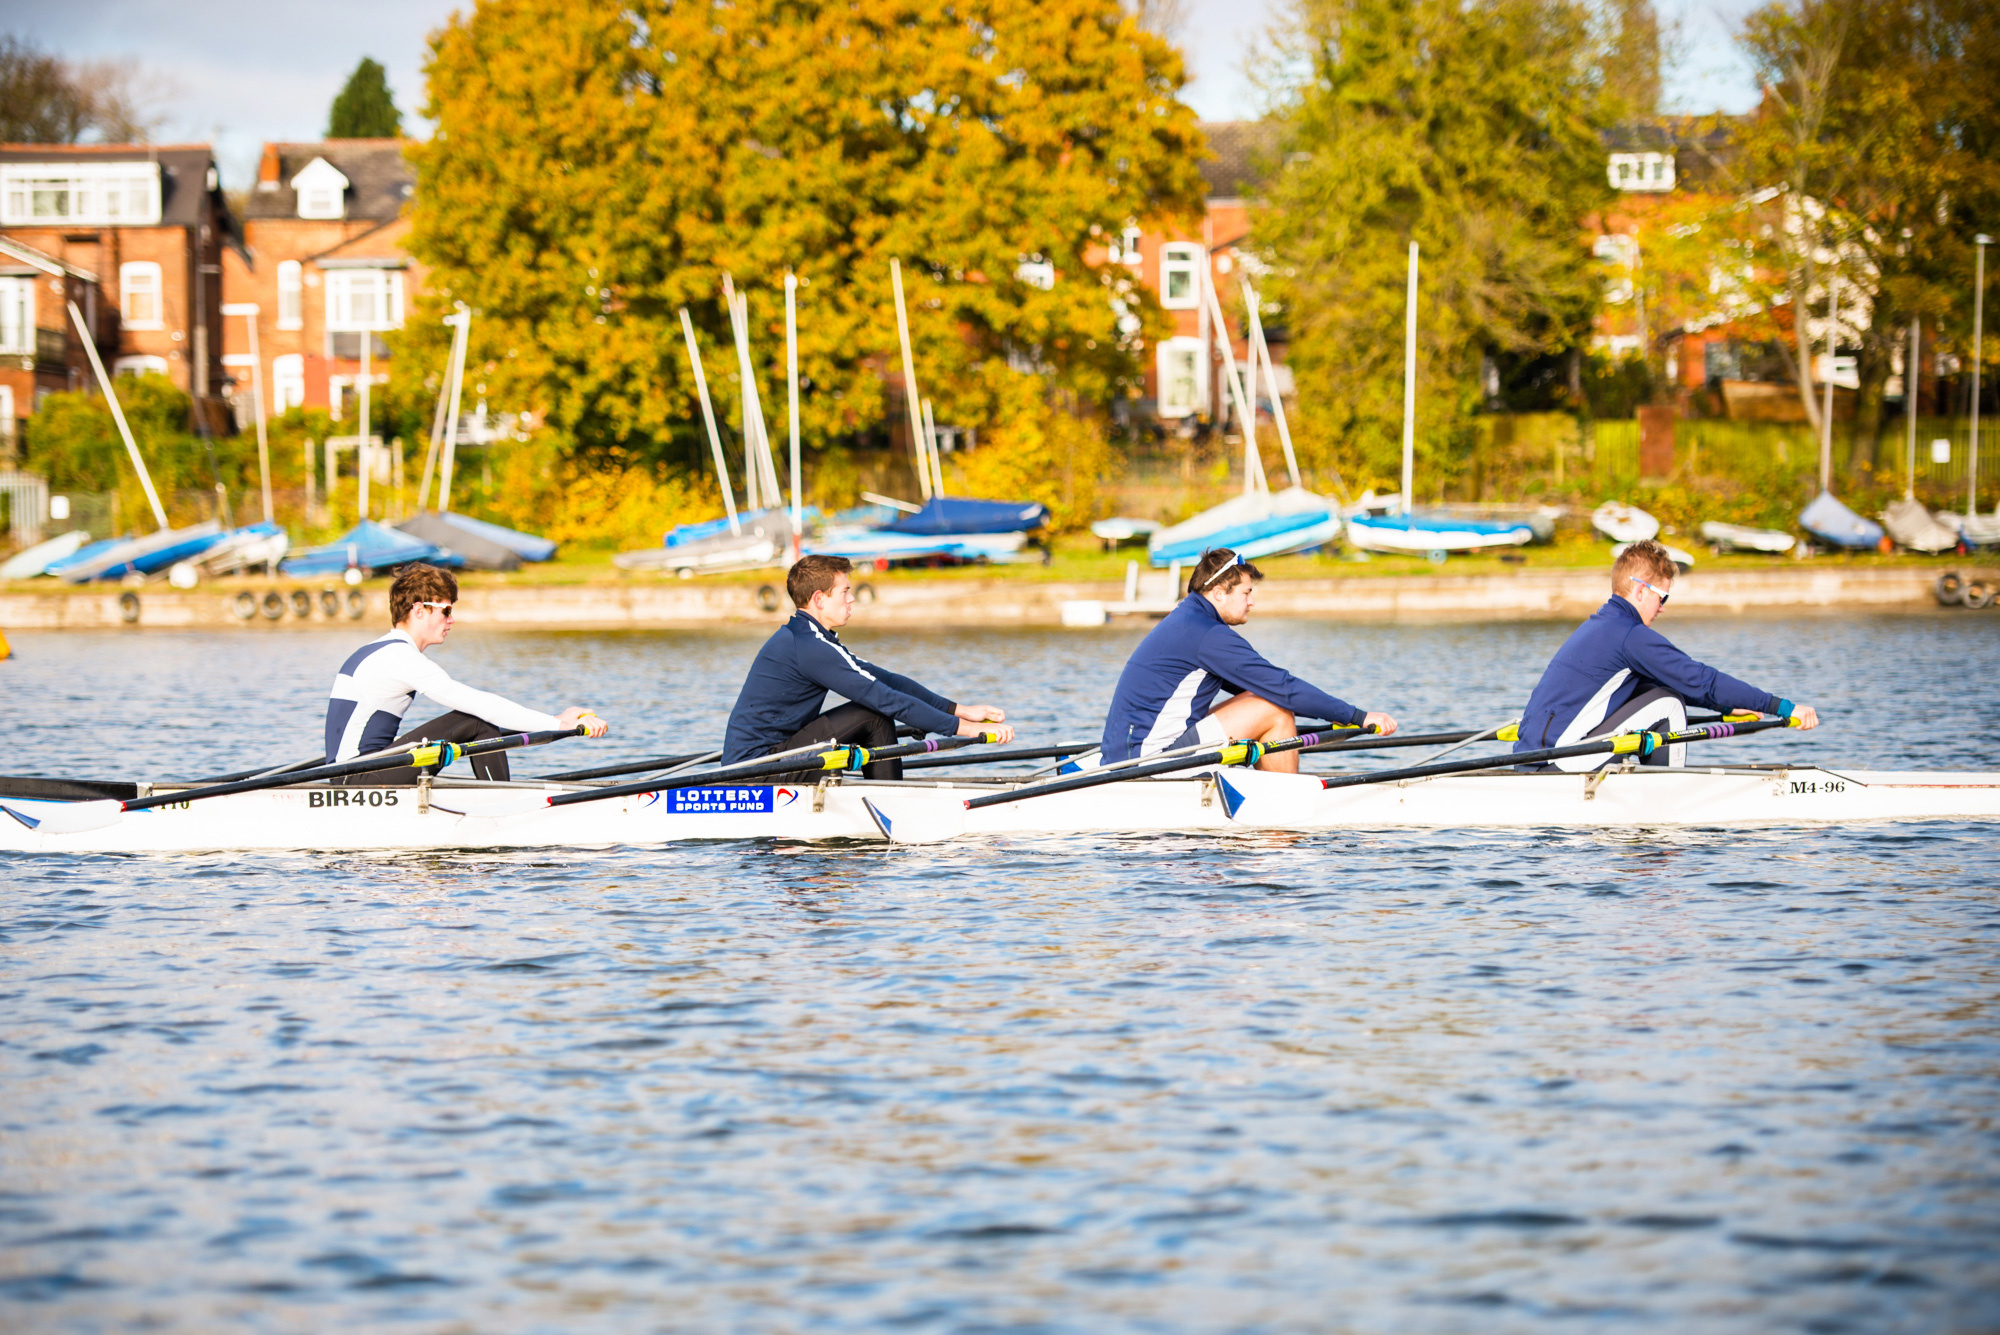 Rowing: A recreational boat racing in Birmingham, Competitive skulling, Men's group training session. 2000x1340 HD Wallpaper.